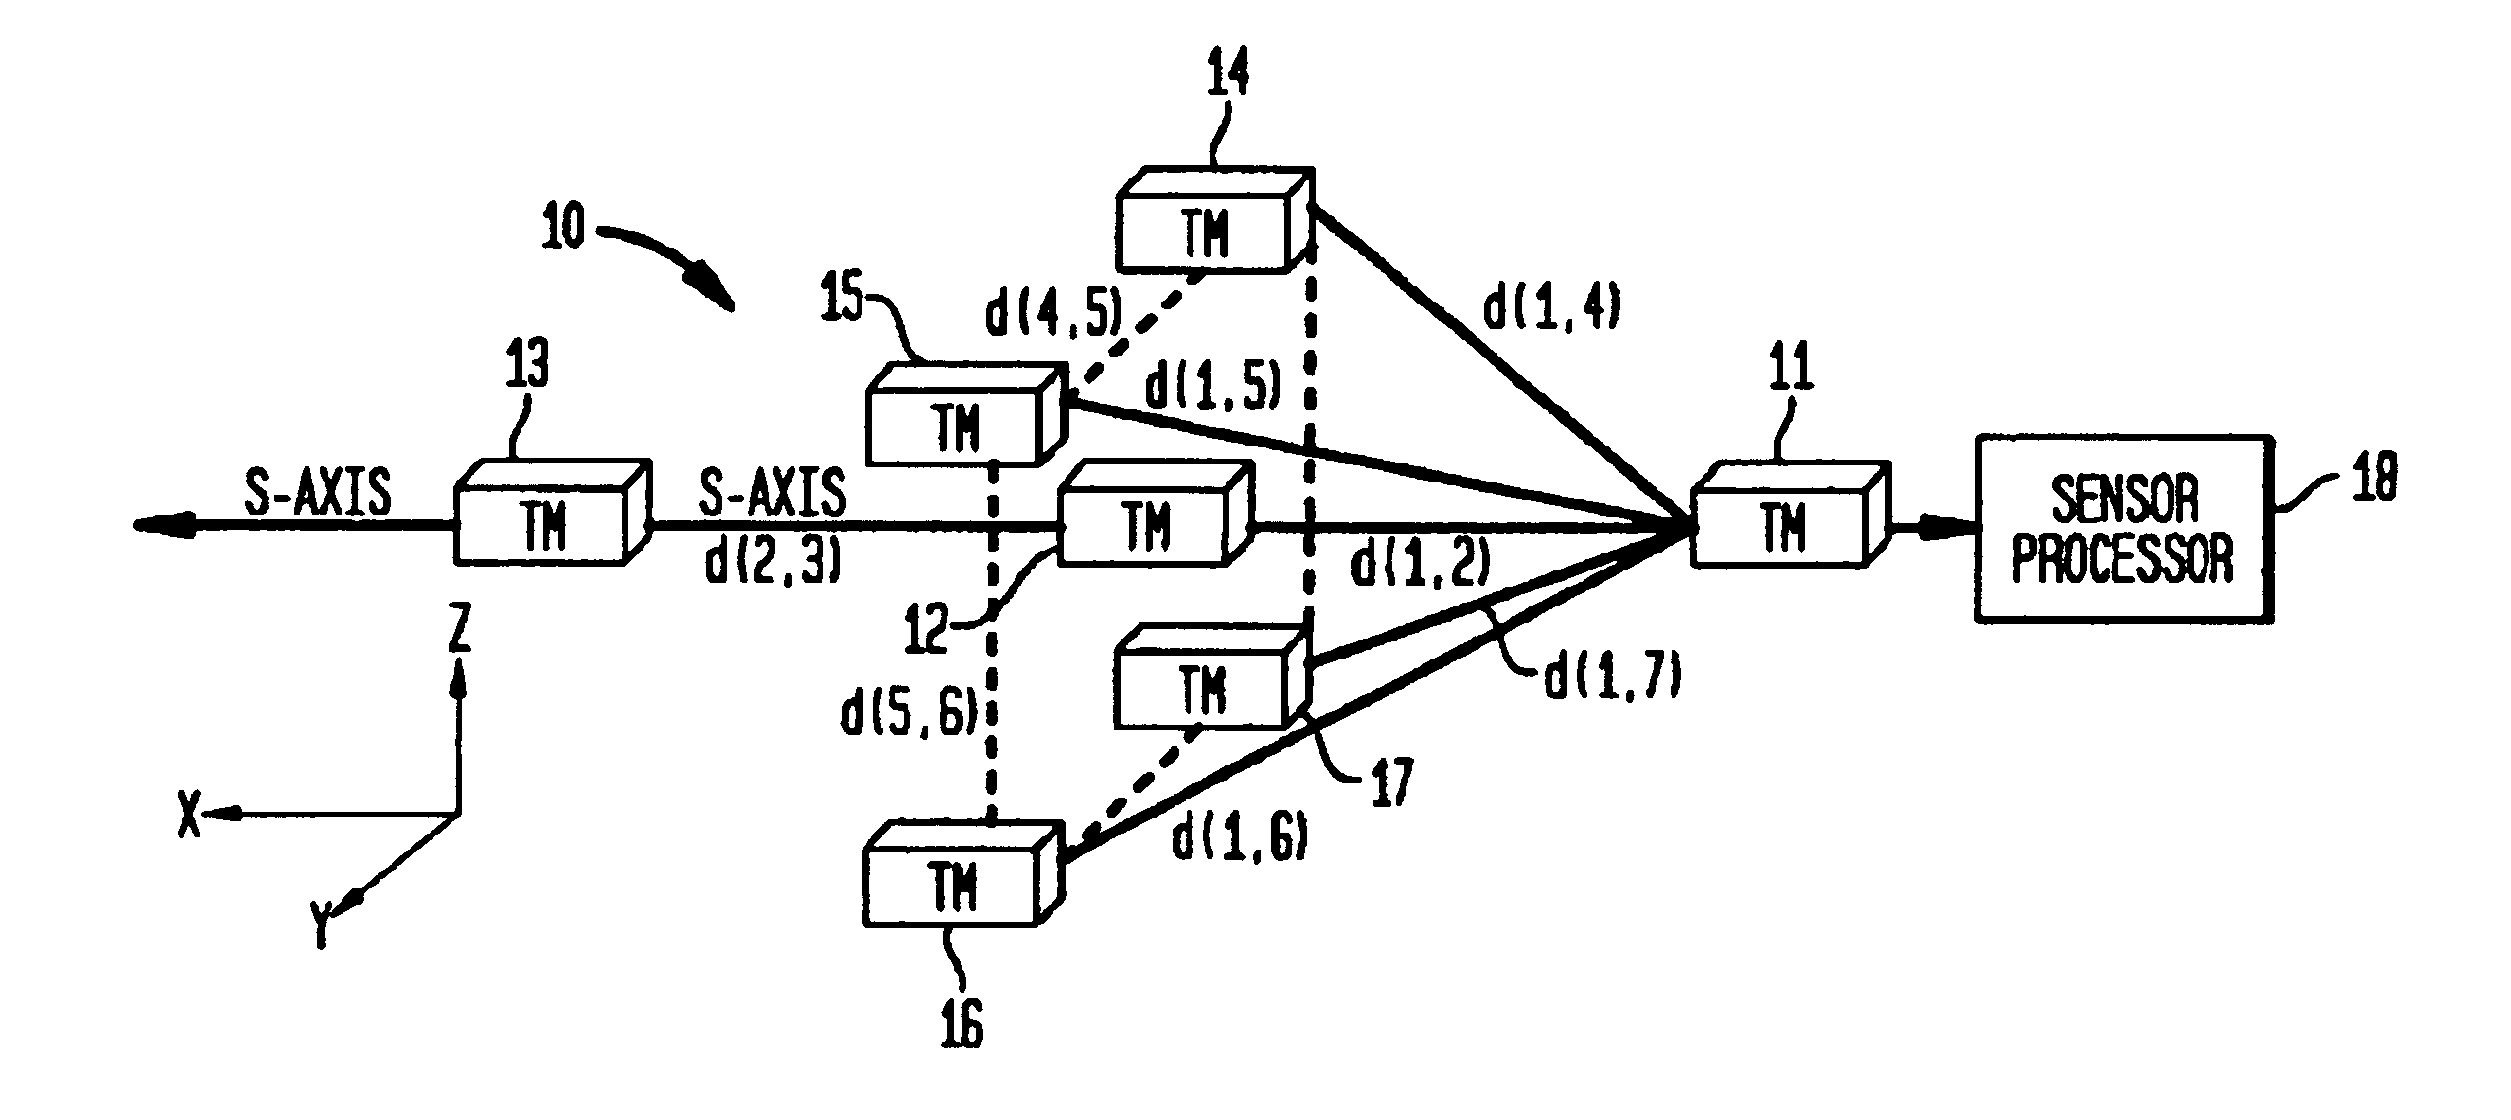 Magnetic anomaly sensing system for detection, localization and classification of magnetic objects